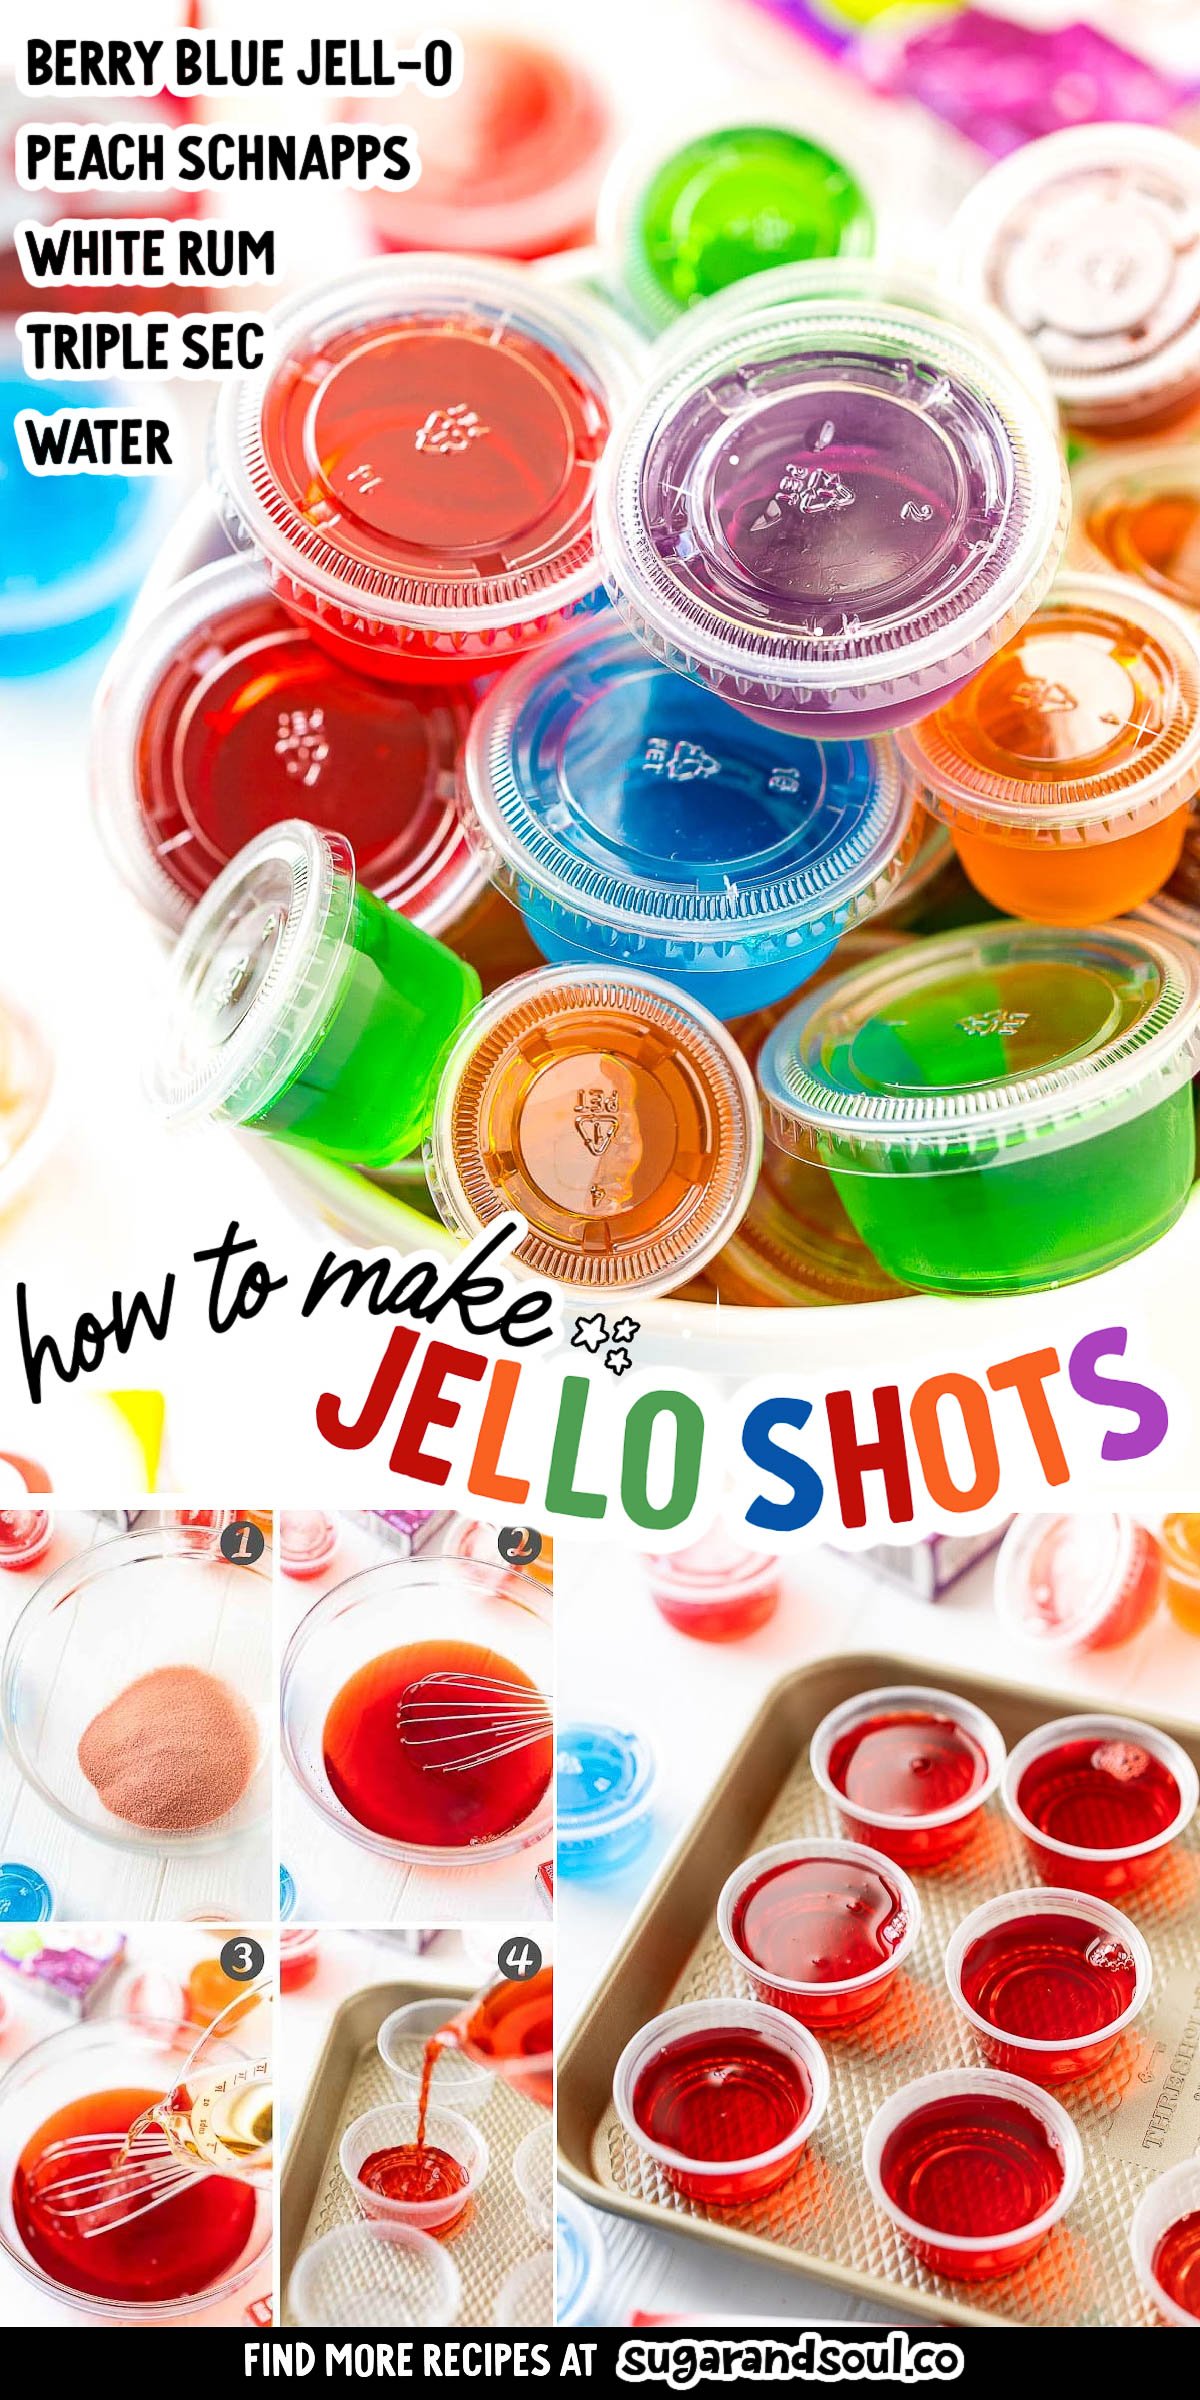 Looking for a fun, easy, and fruity cocktail for parties? These shots are made with Jell-O or gelatin and alcohol! This is the Ultimate Guide for How To Make Jello Shots where I'll share tips, ideas, and some of my favorite recipes! via @sugarandsoulco